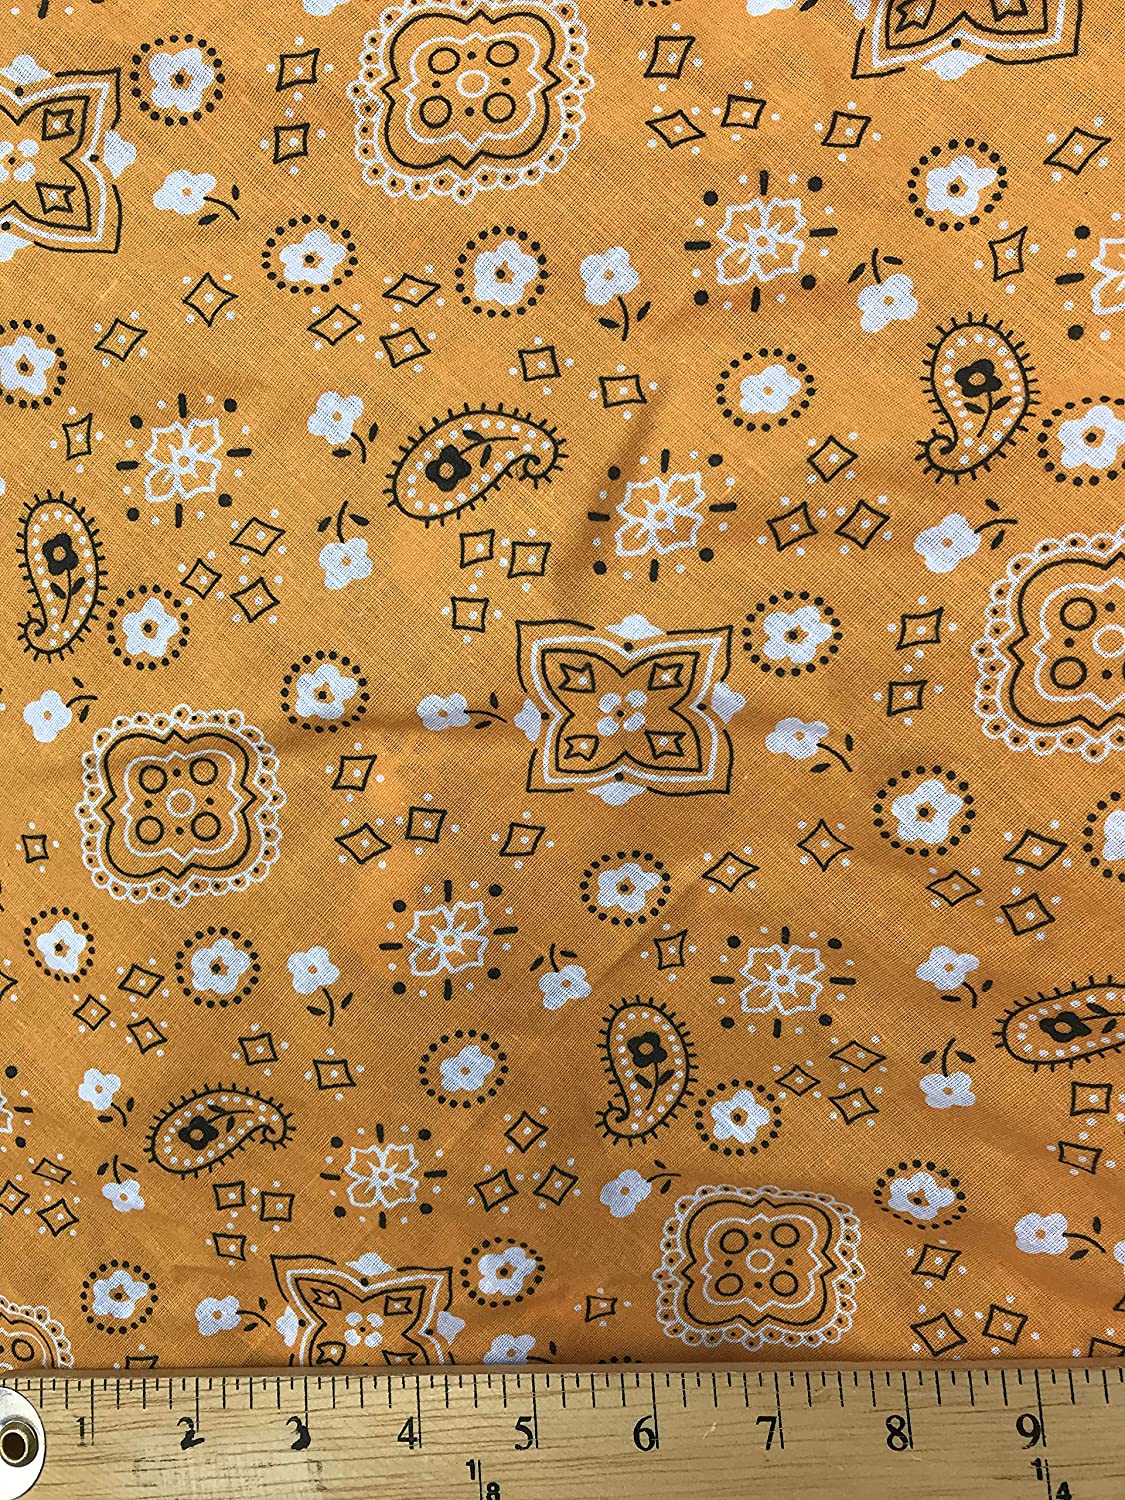 60" Wide Poly Cotton Bandanna Print Fabric by The Yard (Tangerine, by The Yard)